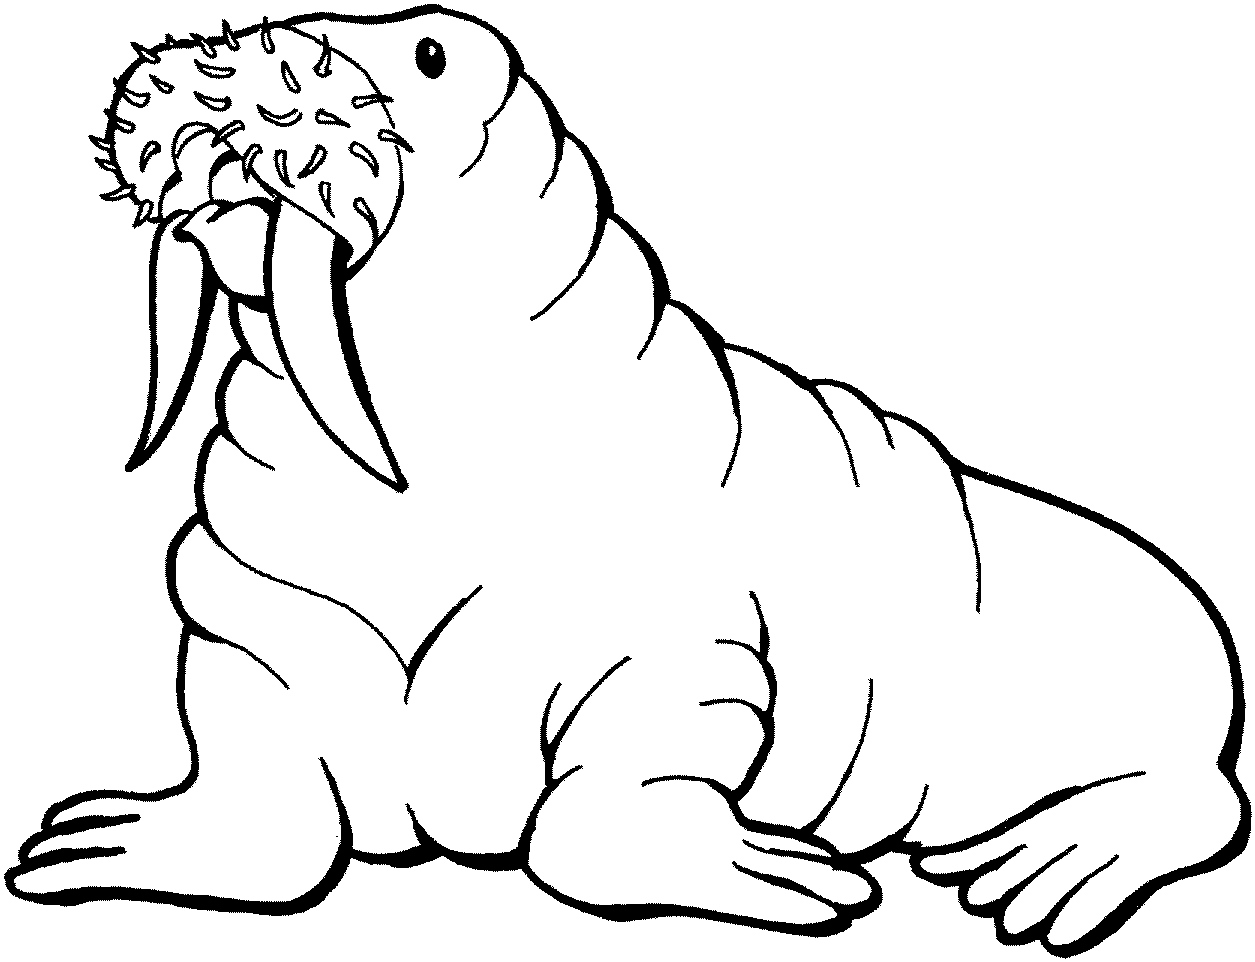 Free coloring pages wikiclipart. Walrus clipart color